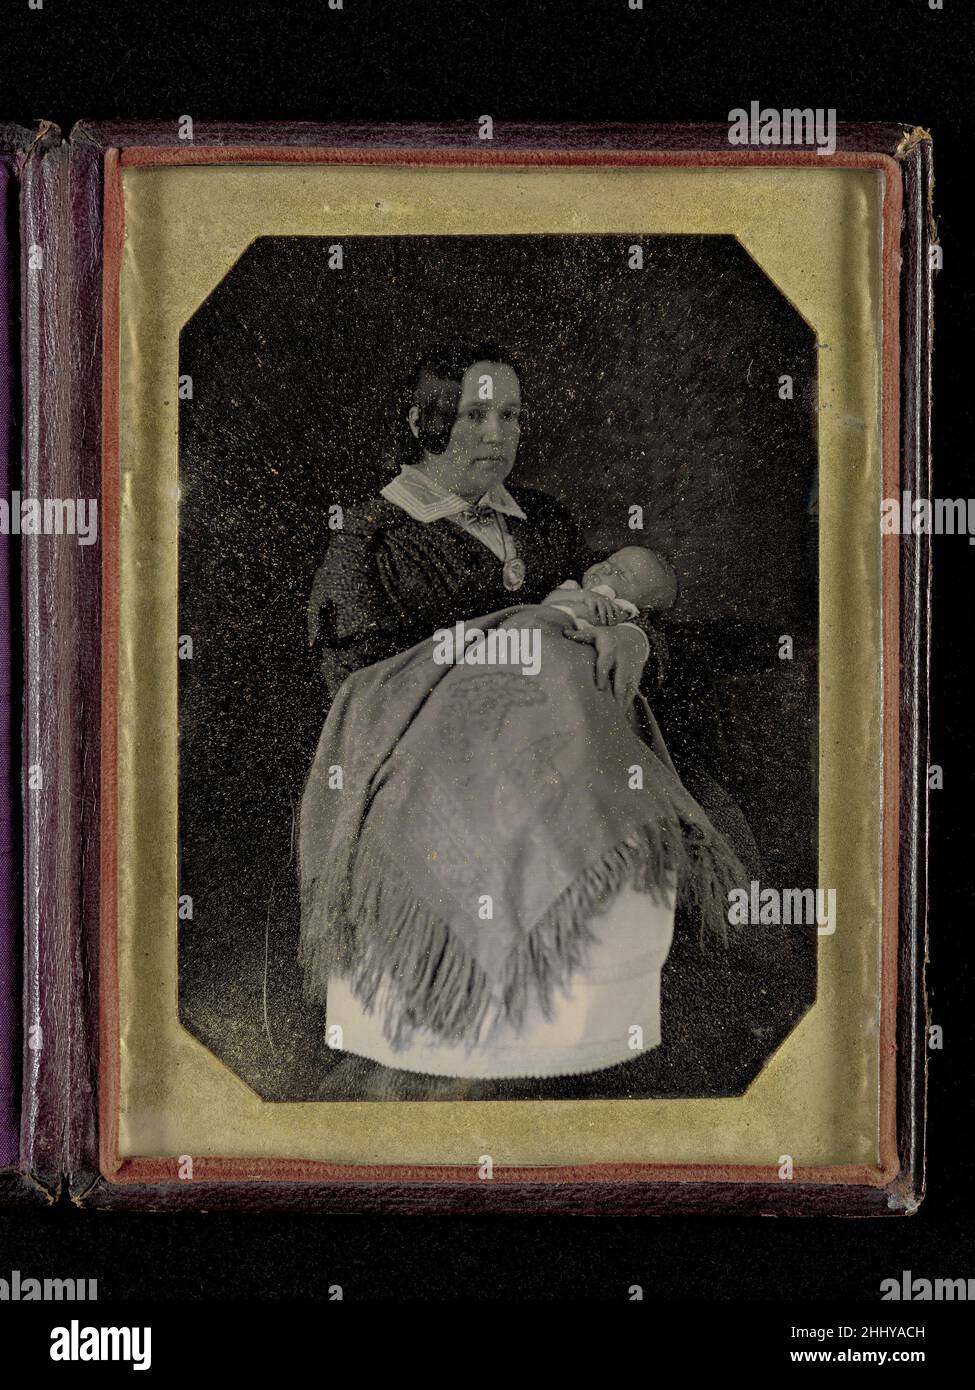 [Mrs. Thomas Ustick Walter and Her Deceased Child] ca. 1846 W. & F. Langenheim. [Mrs. Thomas Ustick Walter and Her Deceased Child]  285832 Stock Photo